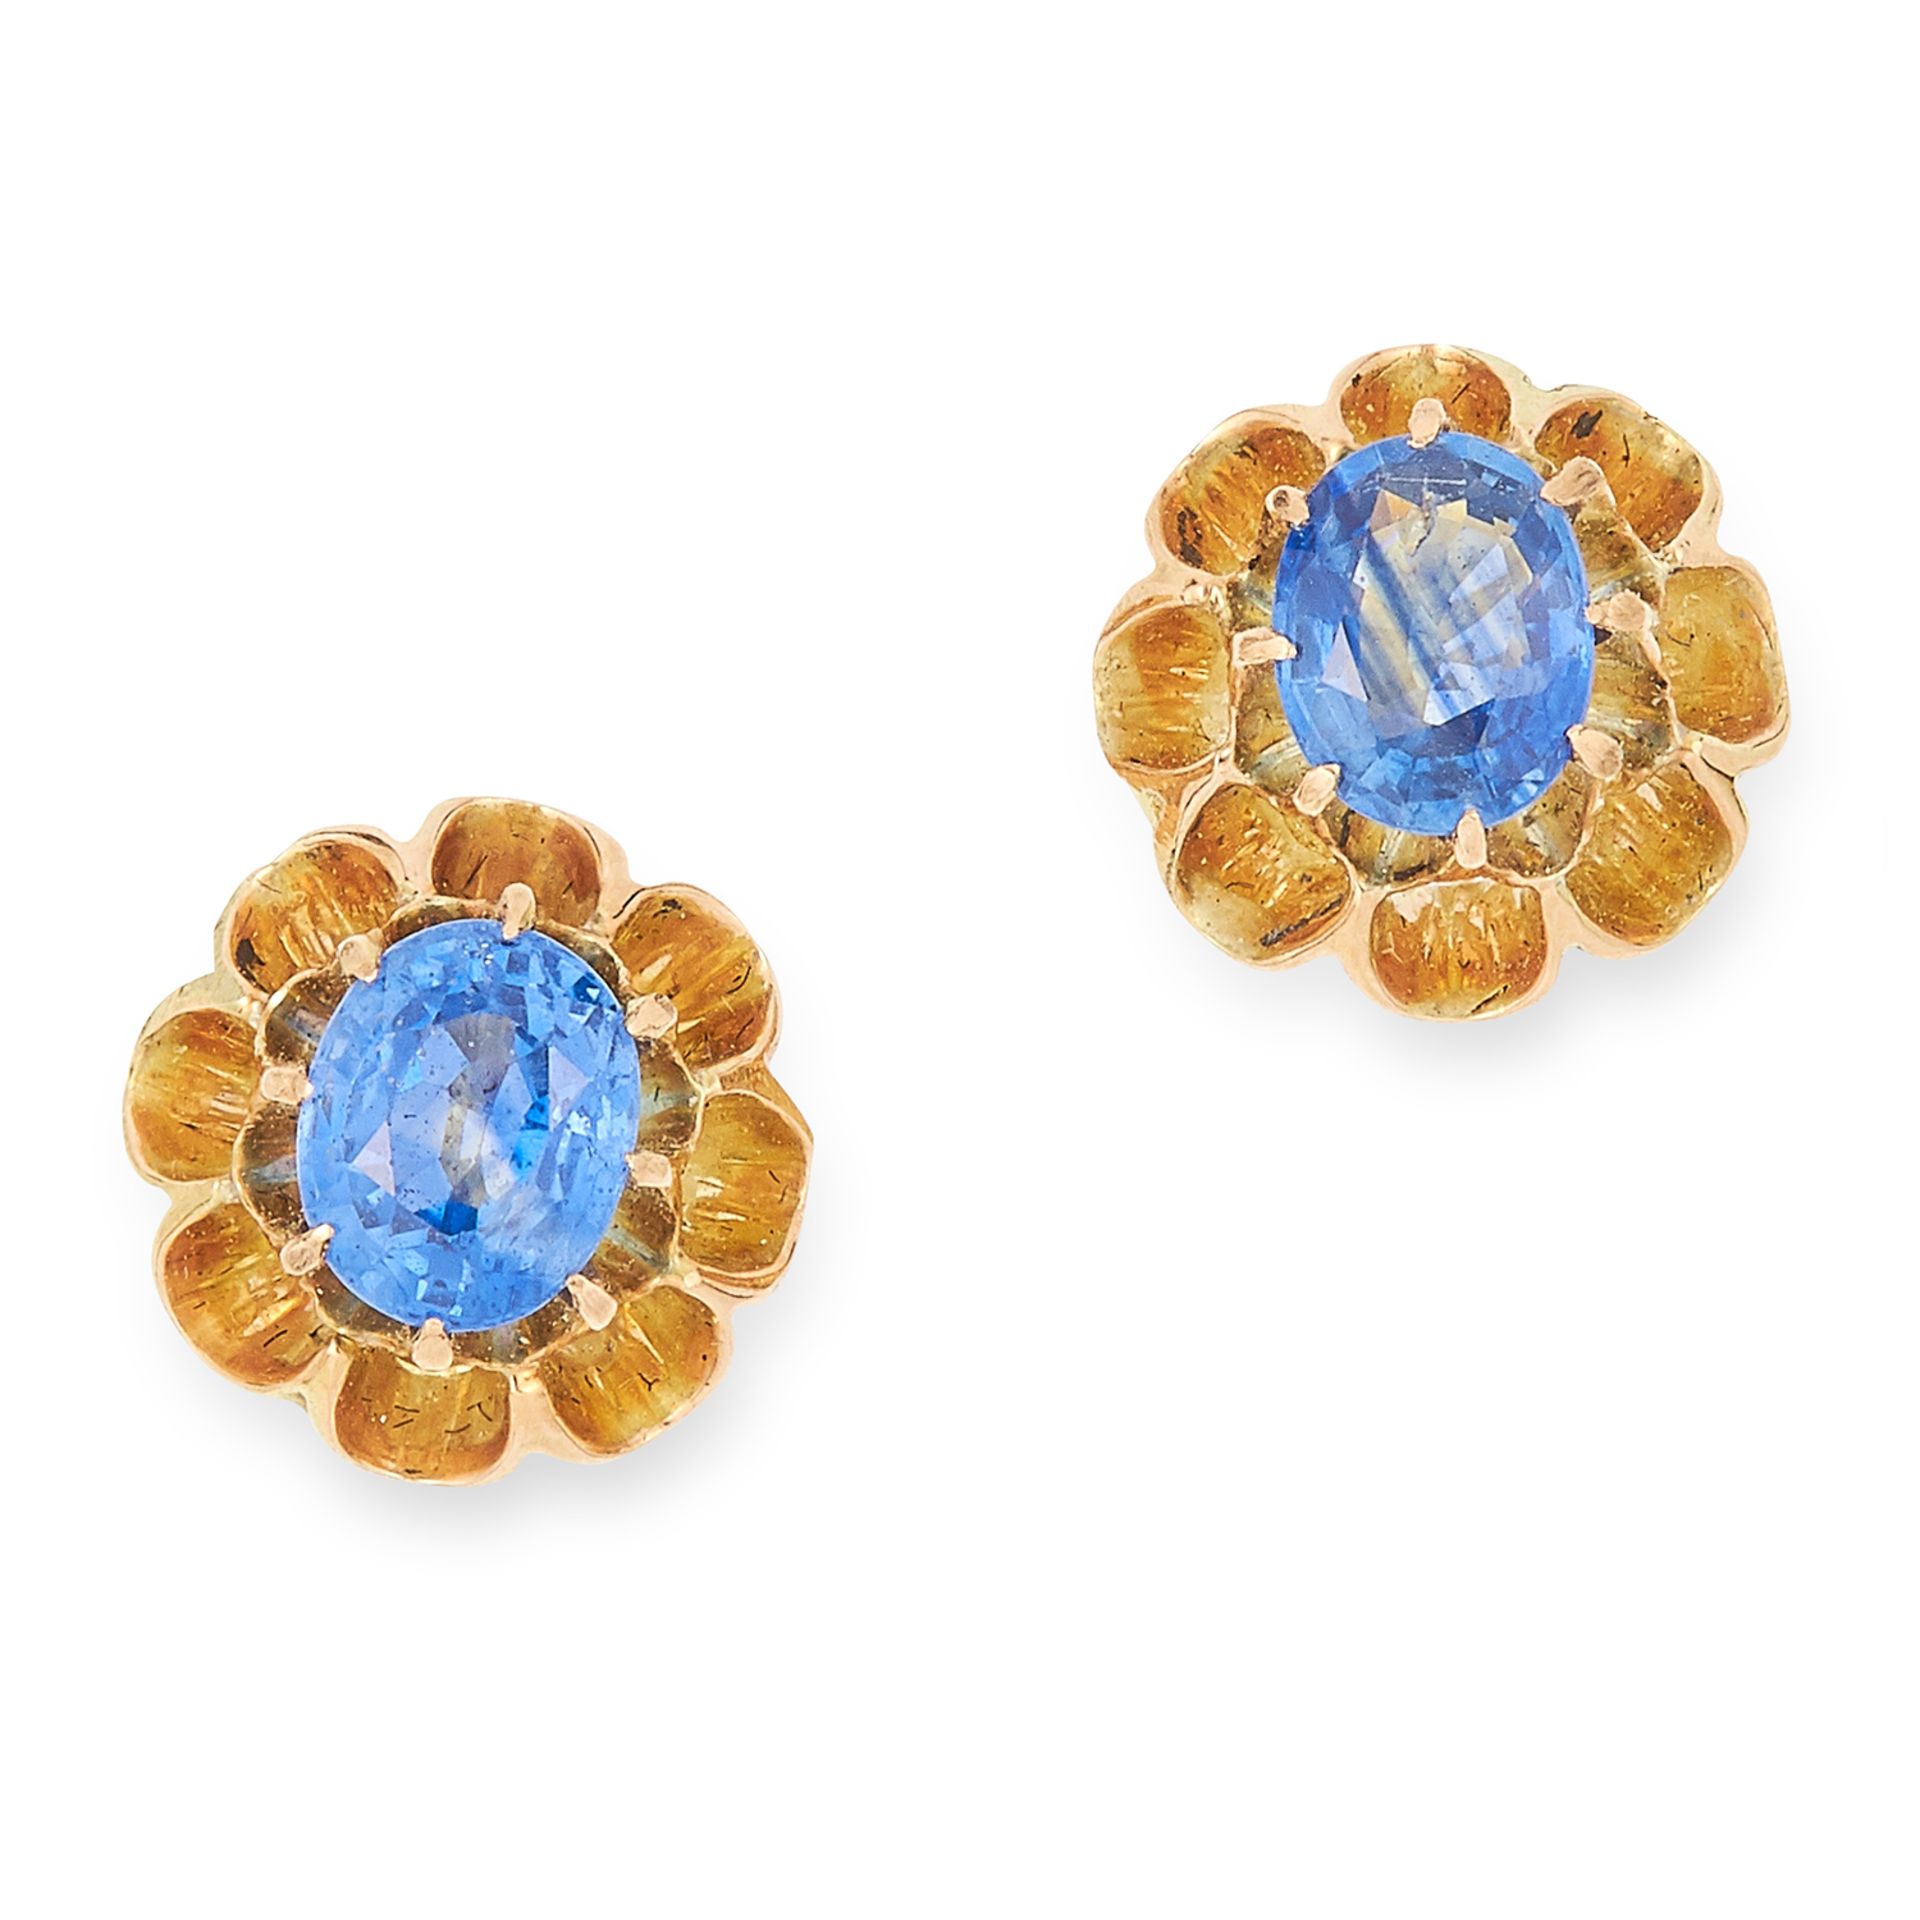 SAPPHIRE EARRINGS, set with oval cut sapphires in a floral border, 9mm, 3g.